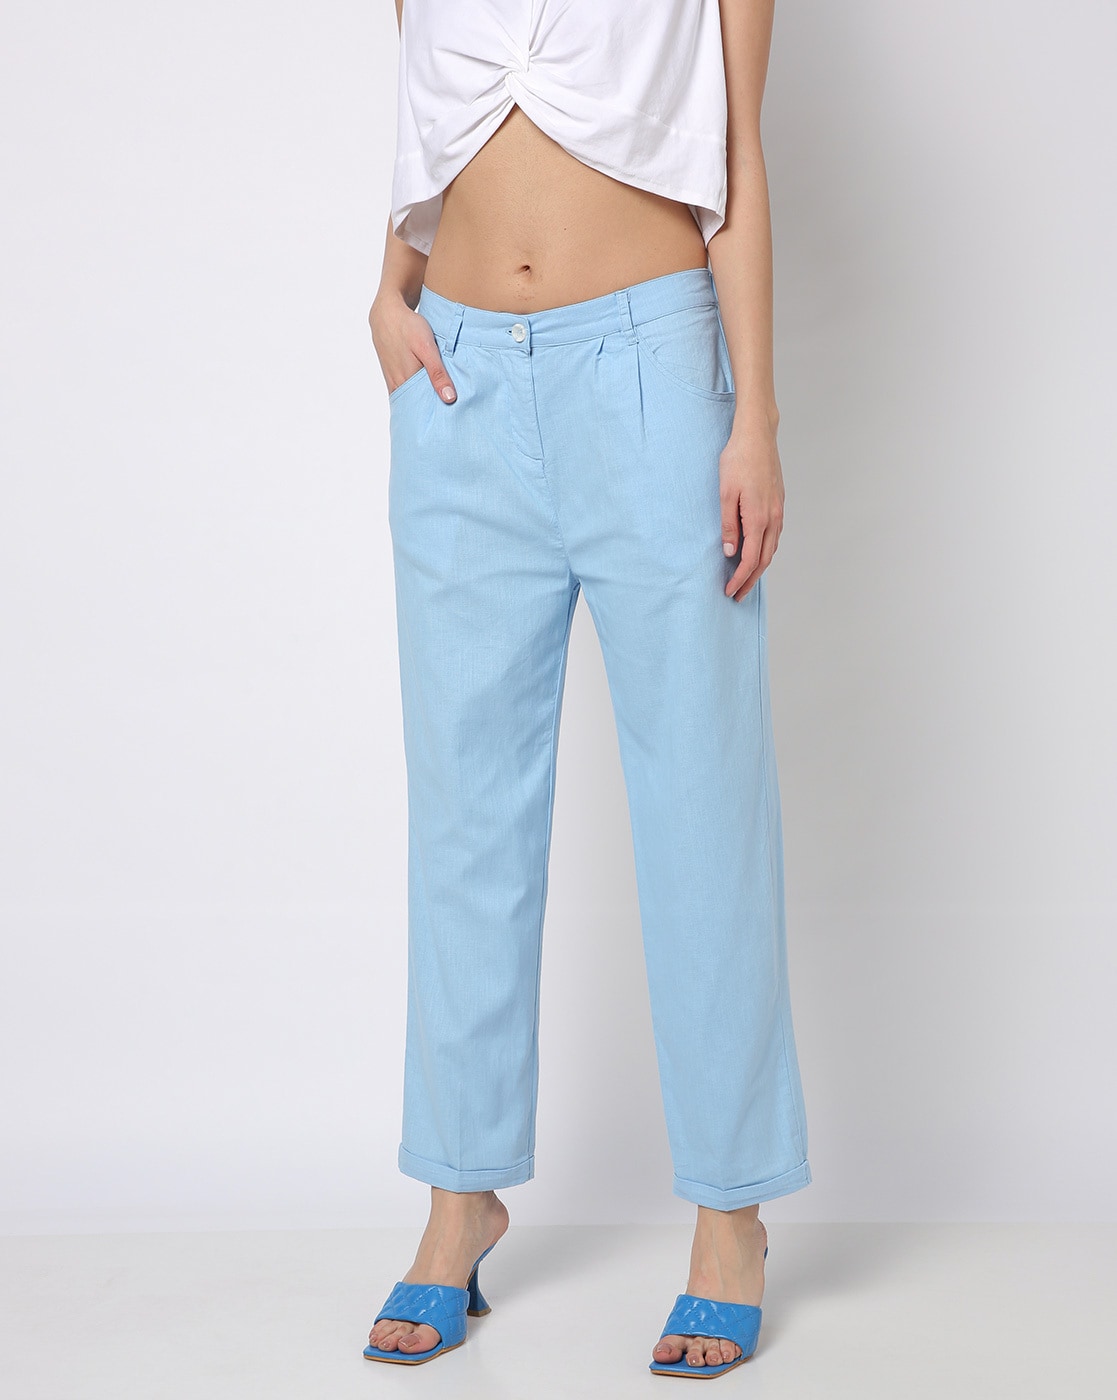 Skechers Incline Midcalf Pant | Light Blue Loose Pant For Women | India